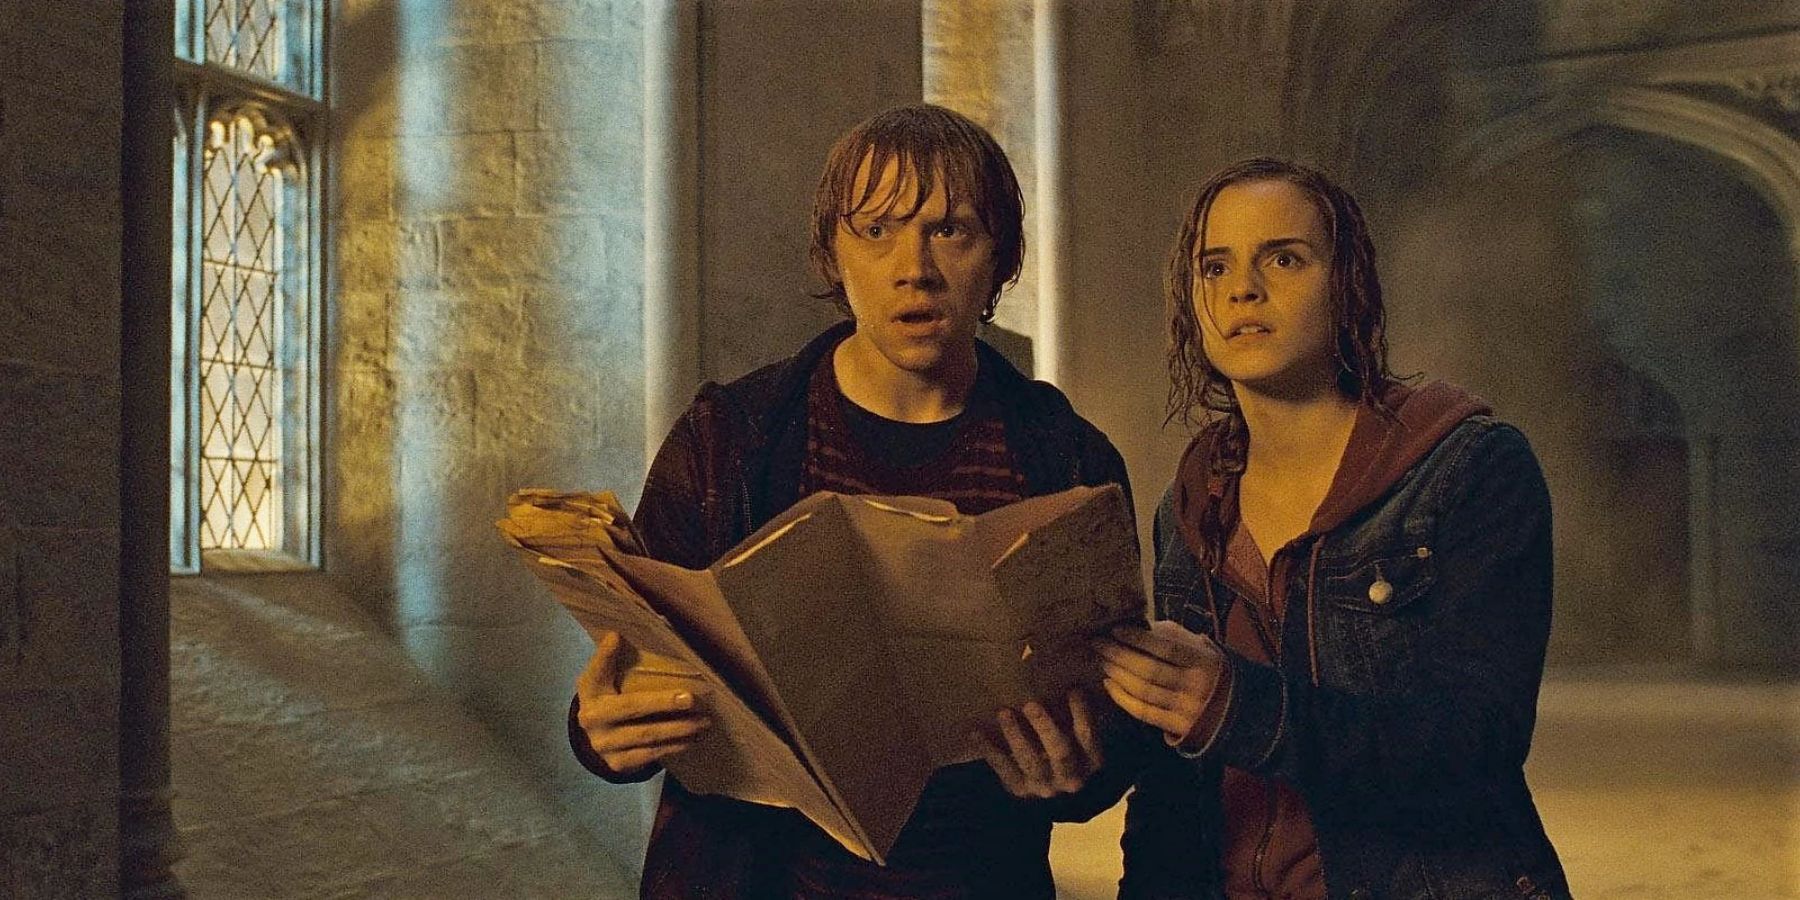 Ron and Hermione using the Marauders Map